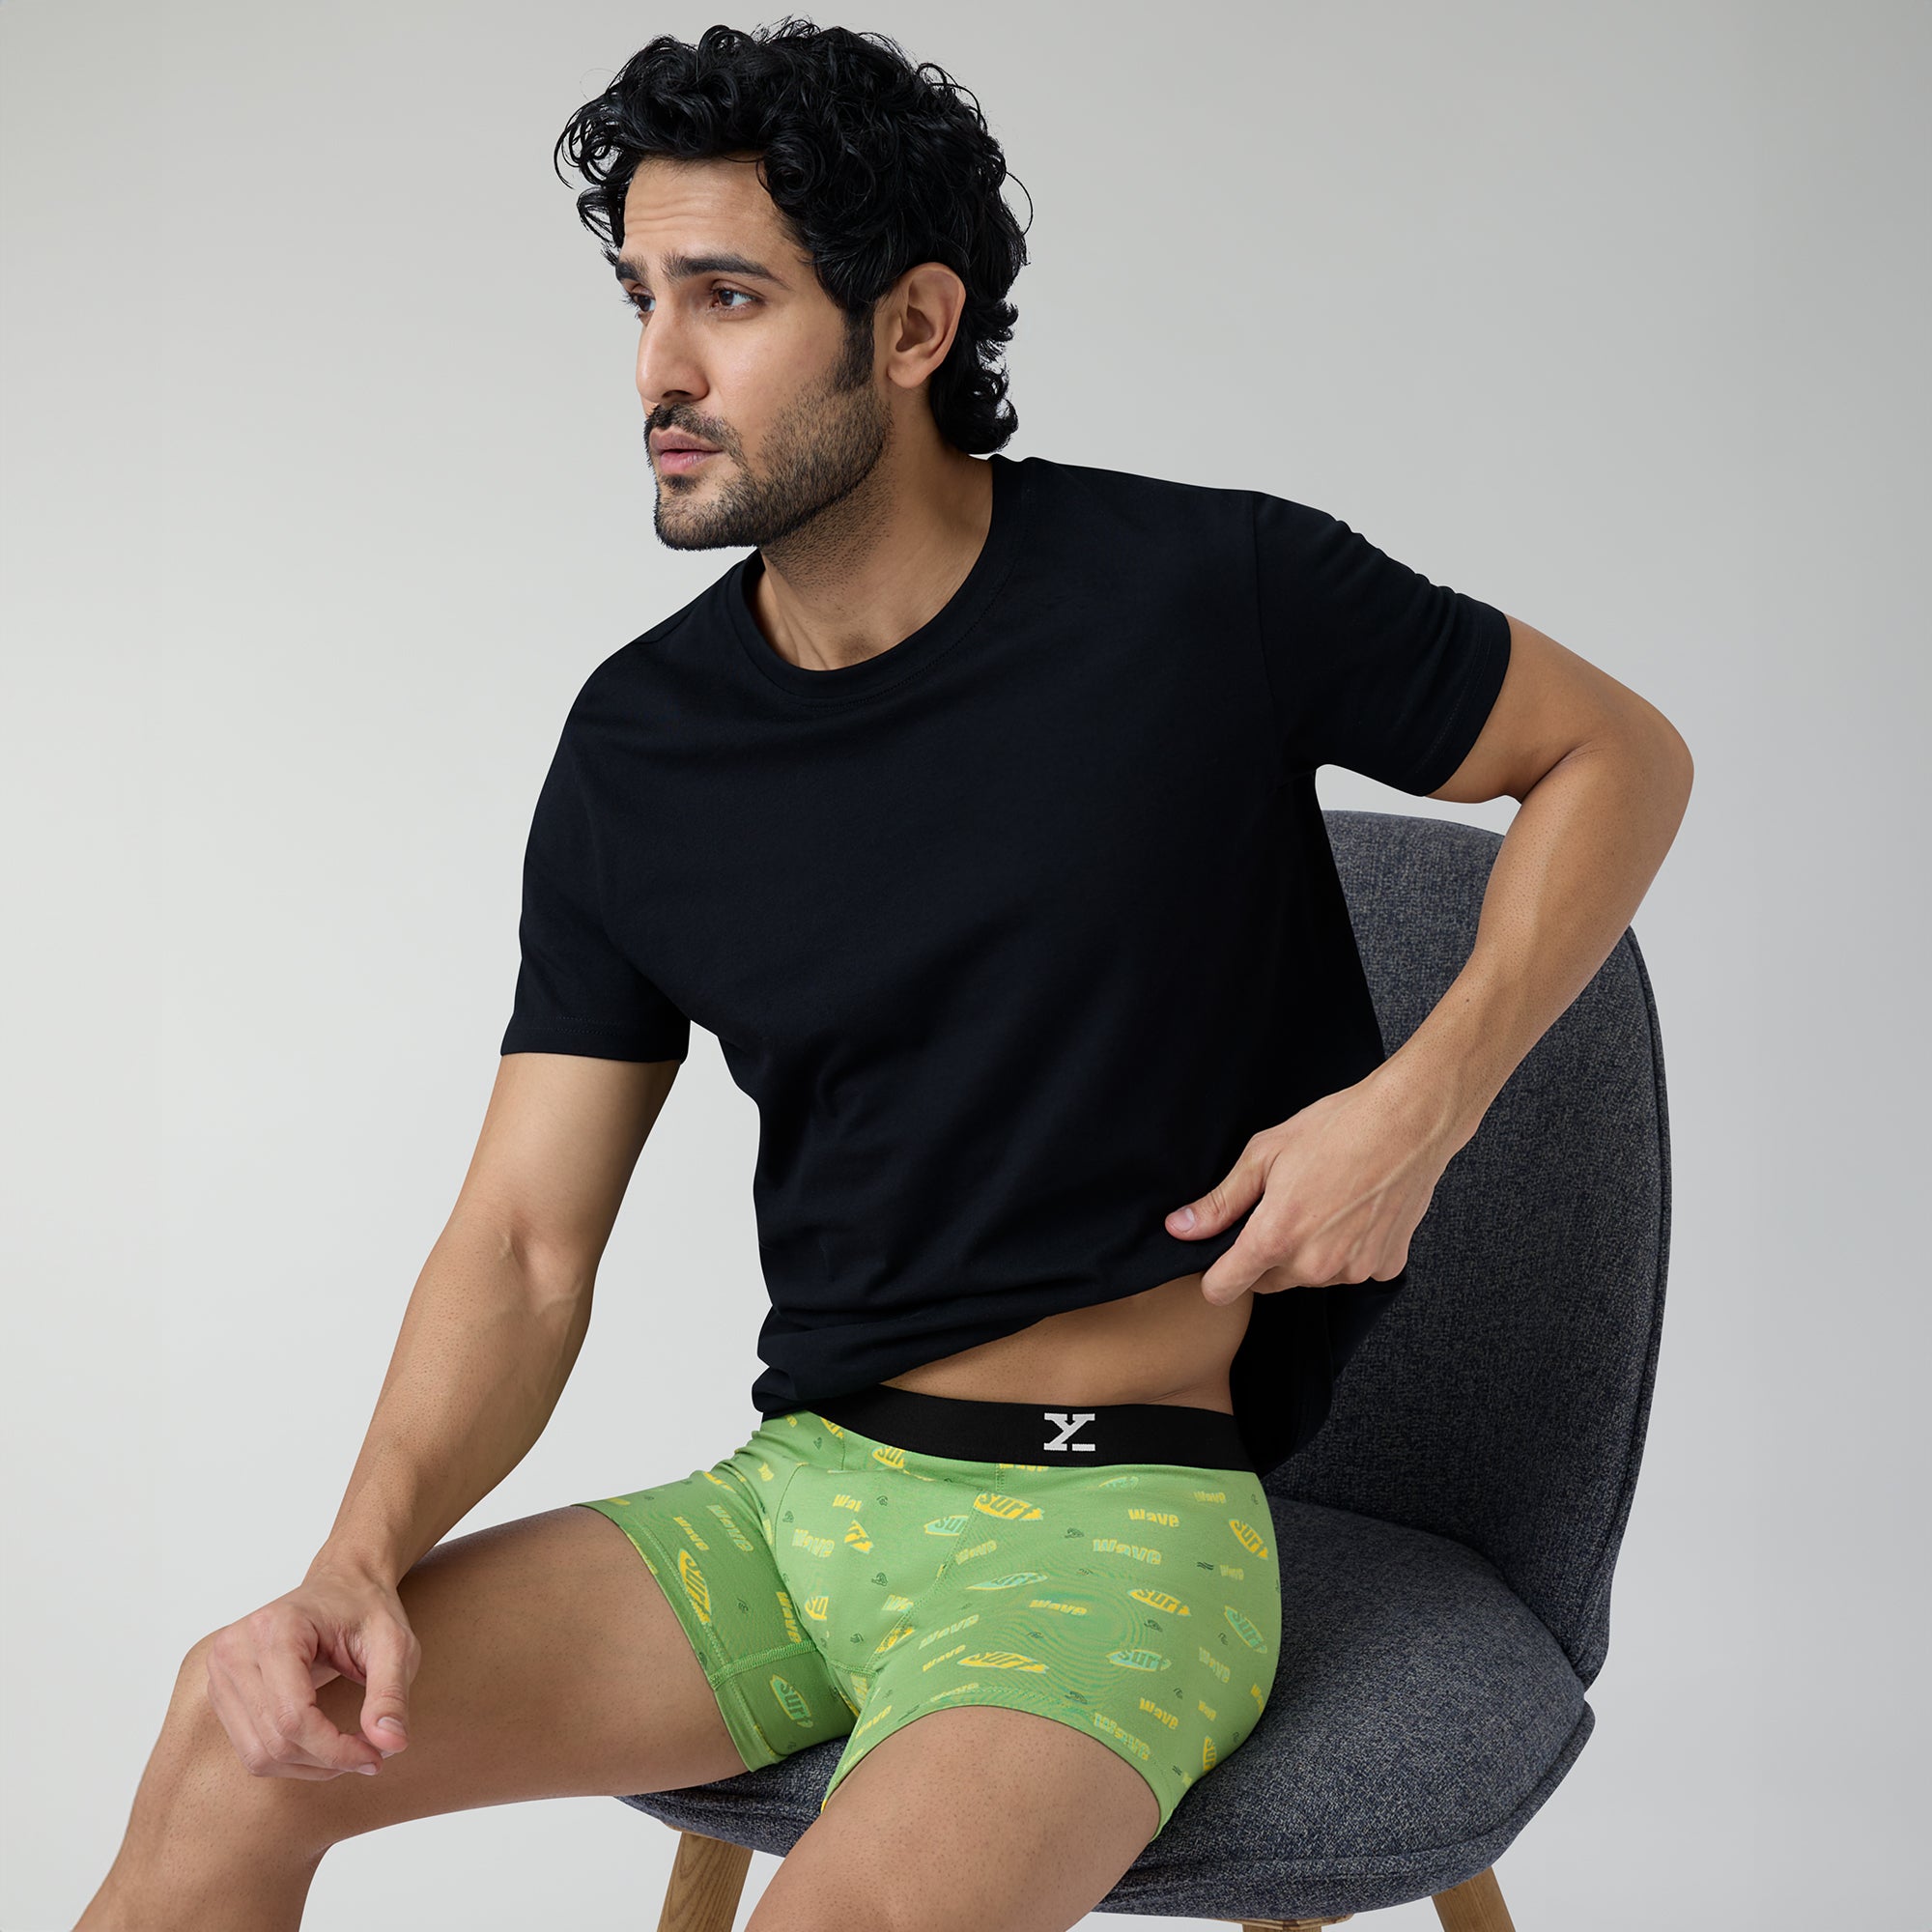 Surf Cotton Stretch Trunks Wave Green